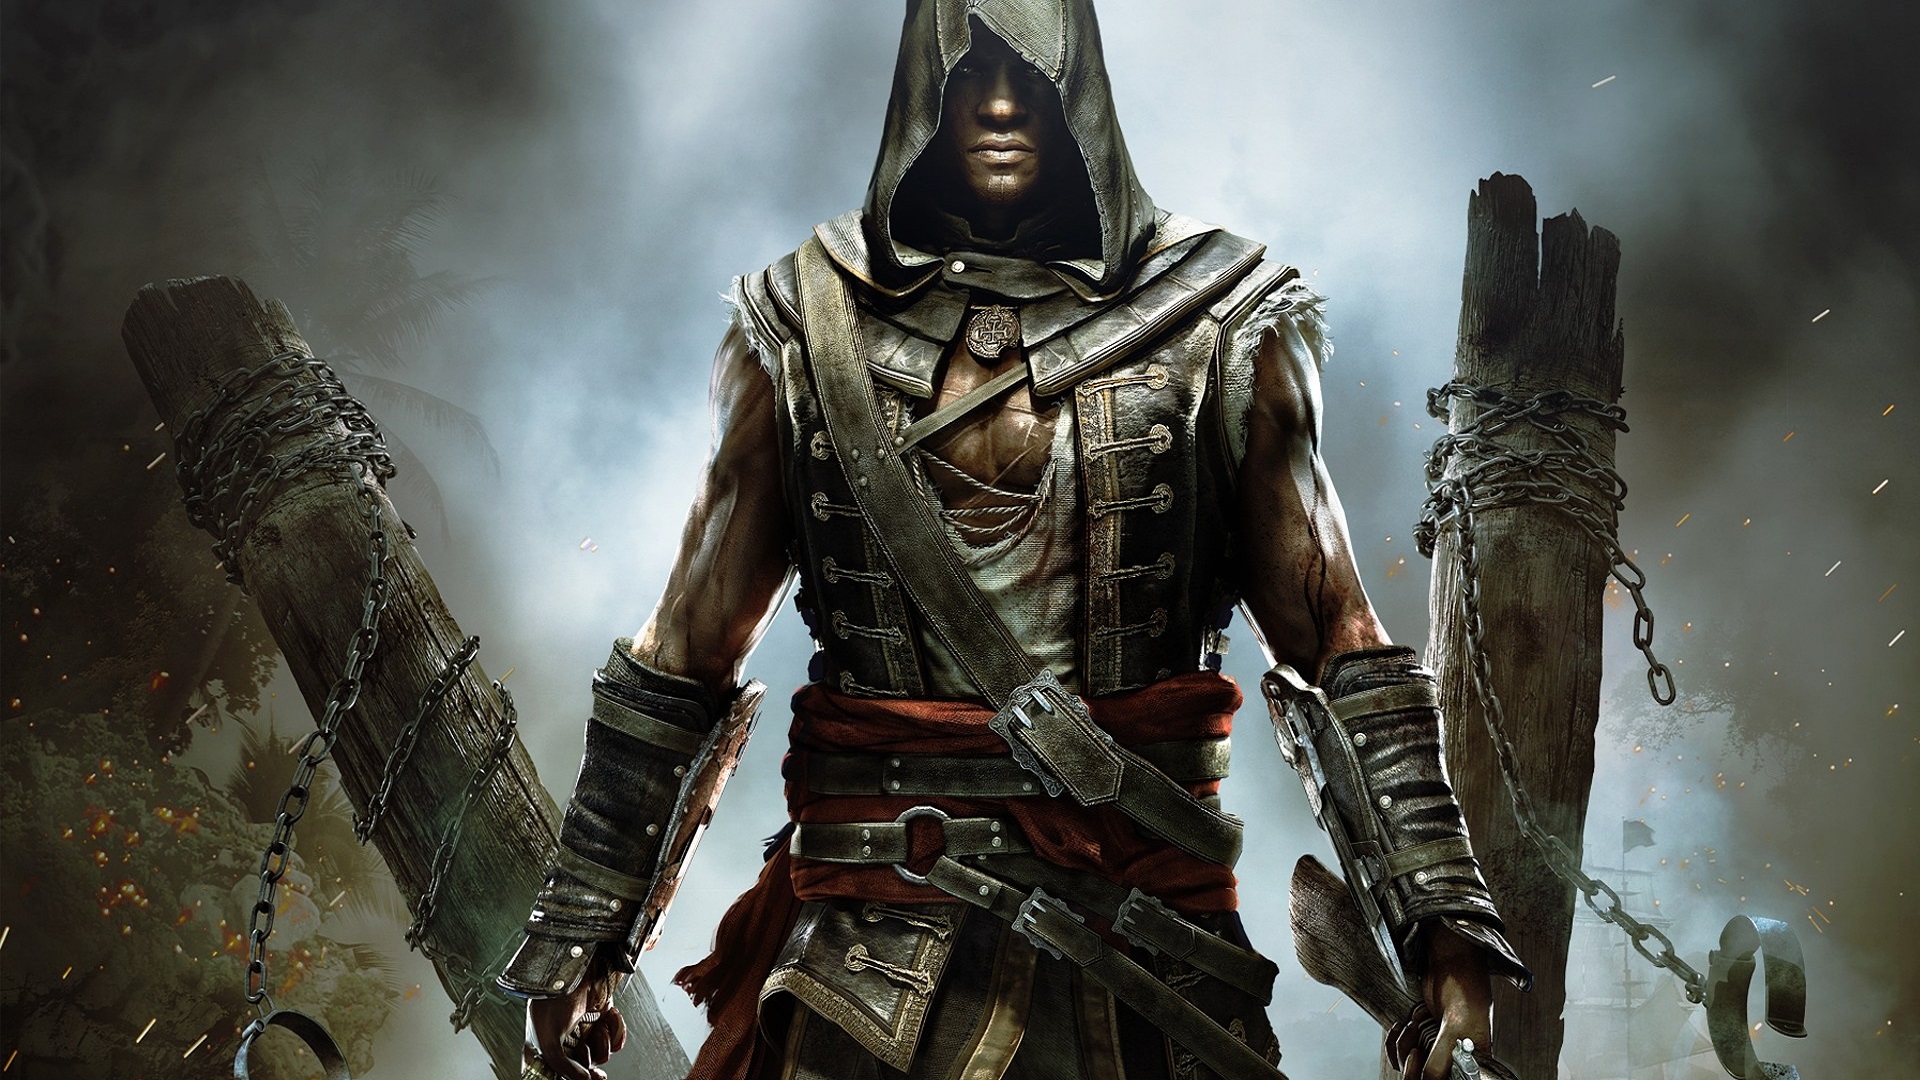 Tapety Z Gry Assassin S Creed Rogue Gryonline Pl